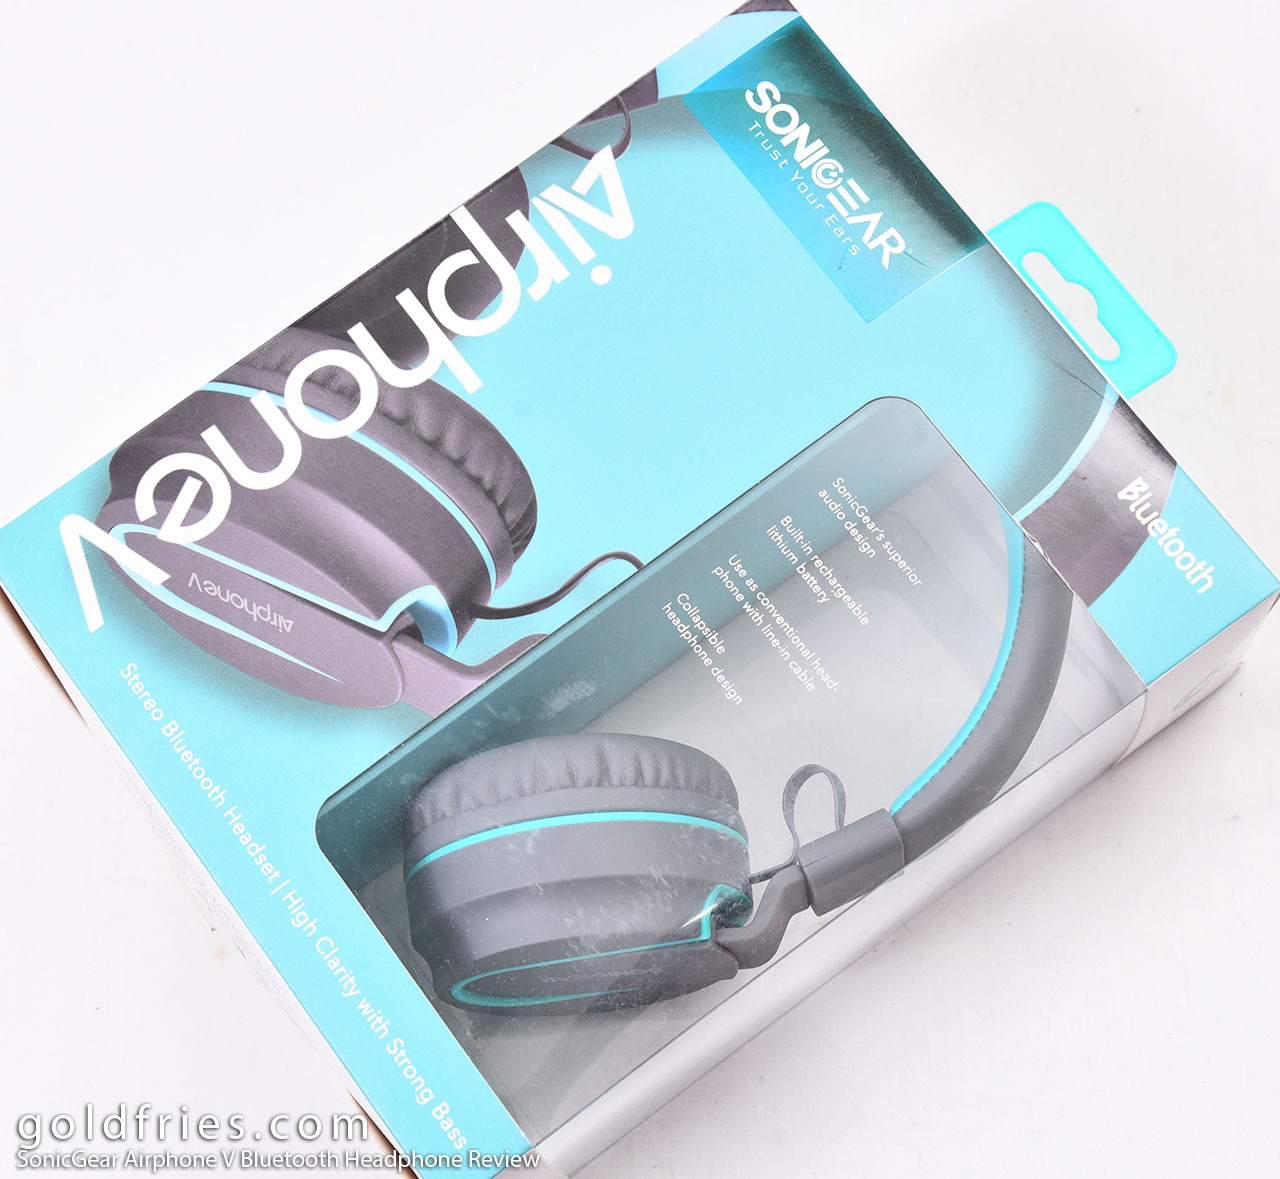 SonicGear Airphone V Bluetooth Headphone Review